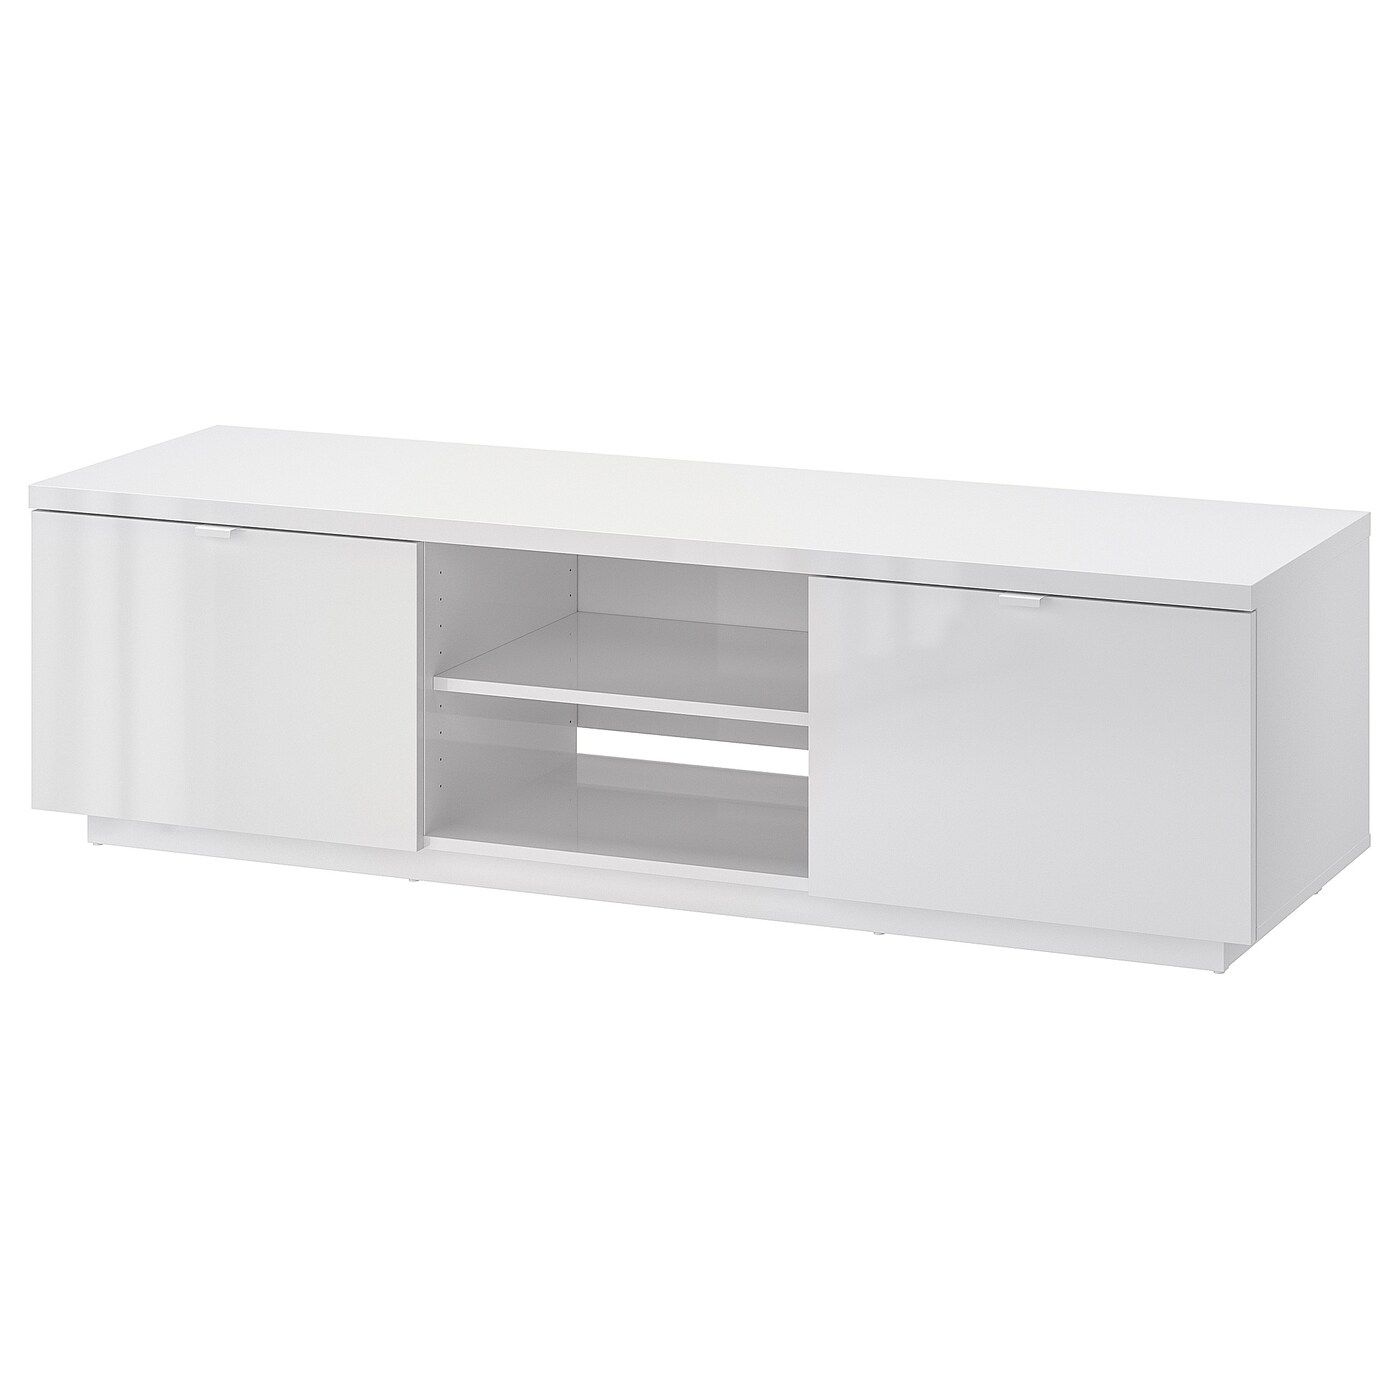 Byås Tv Unit, High Gloss White, 63x16 1/2x17 3/4" – Ikea Intended For High Gloss Tv Bench (View 10 of 15)